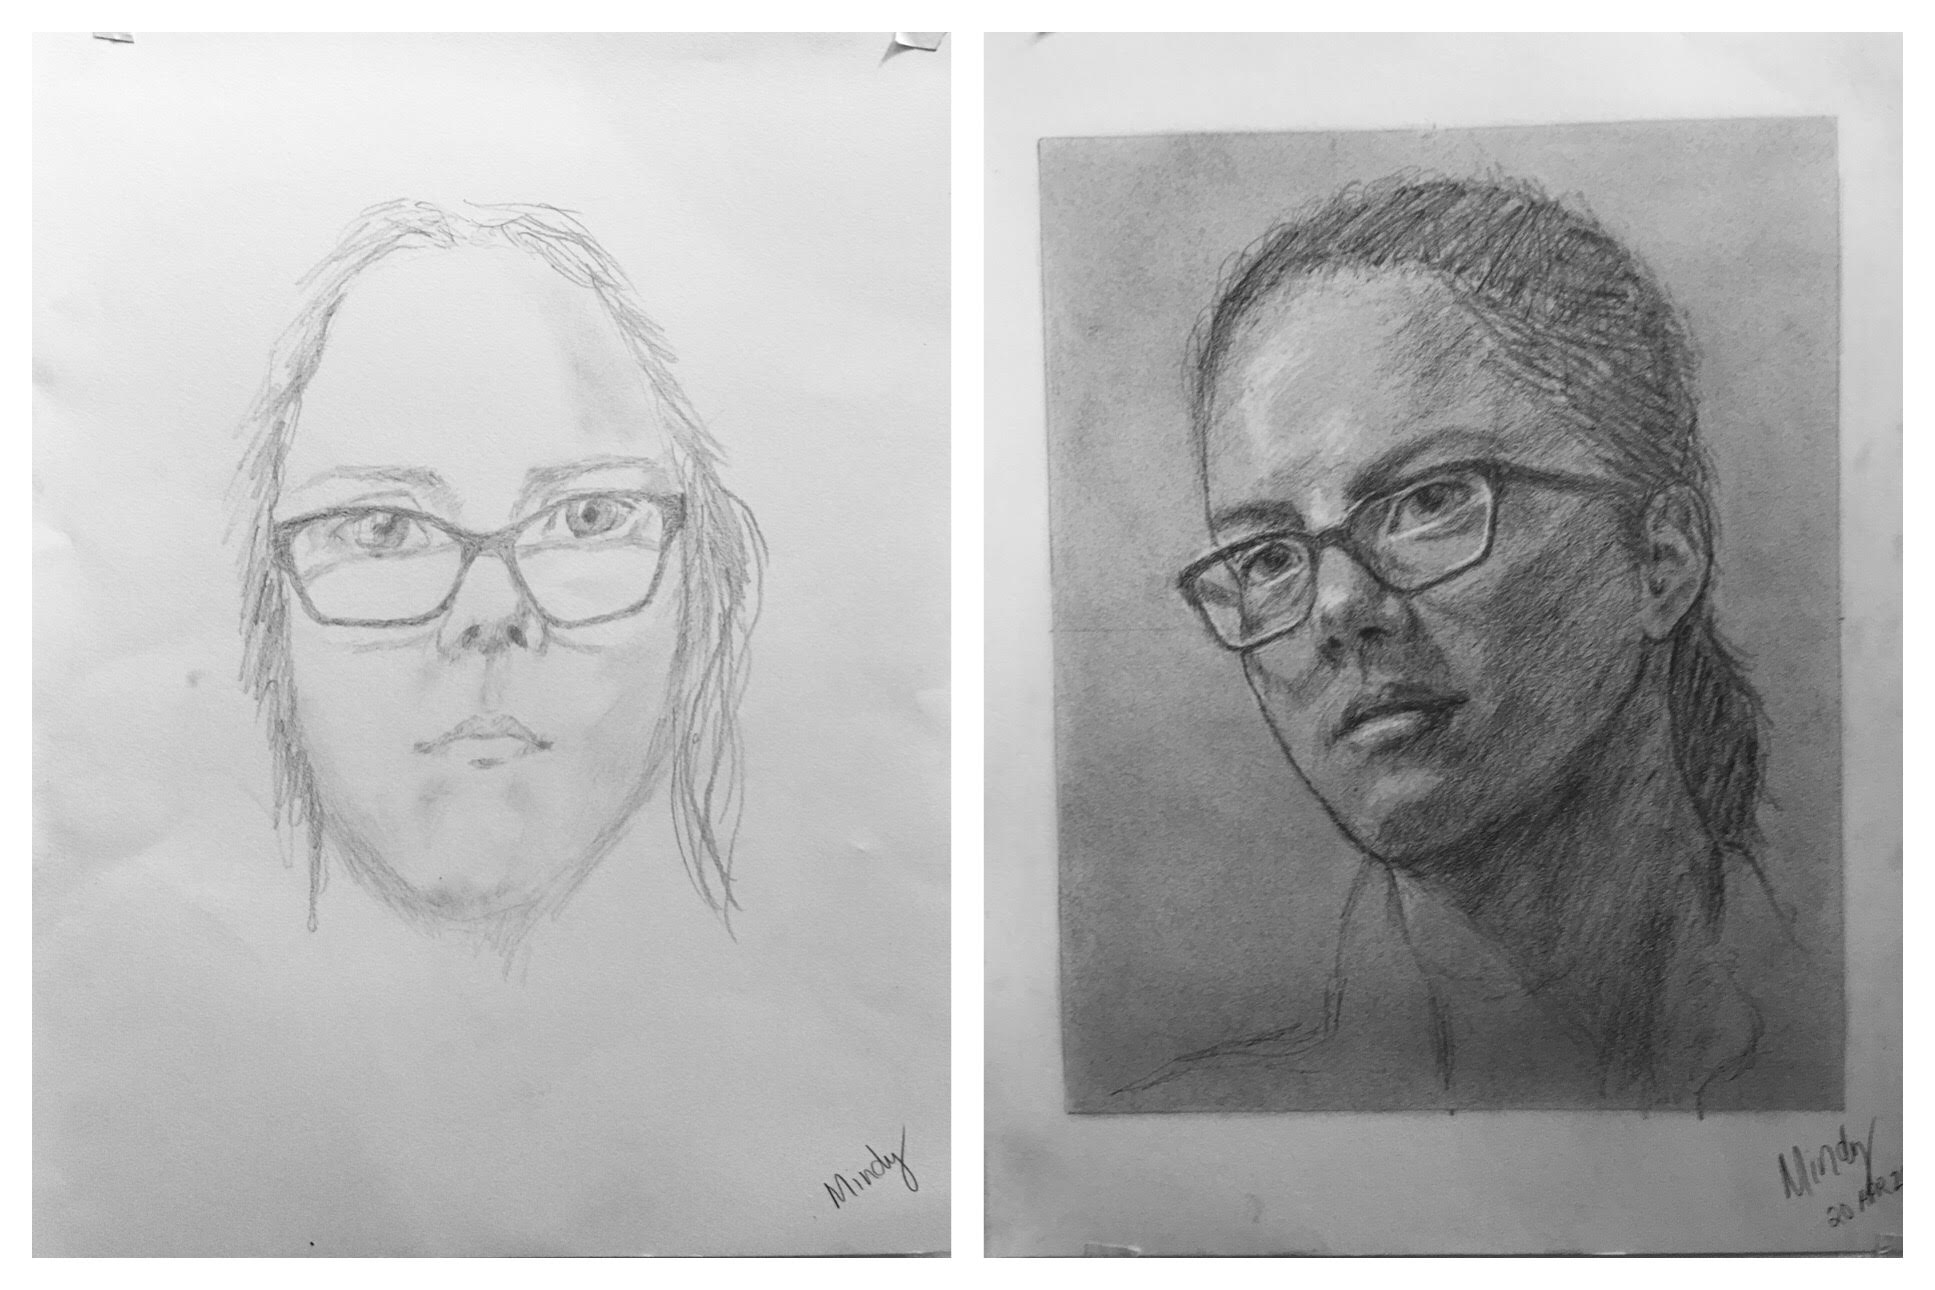 Mindy's Before and After Self-Portrait April 2018